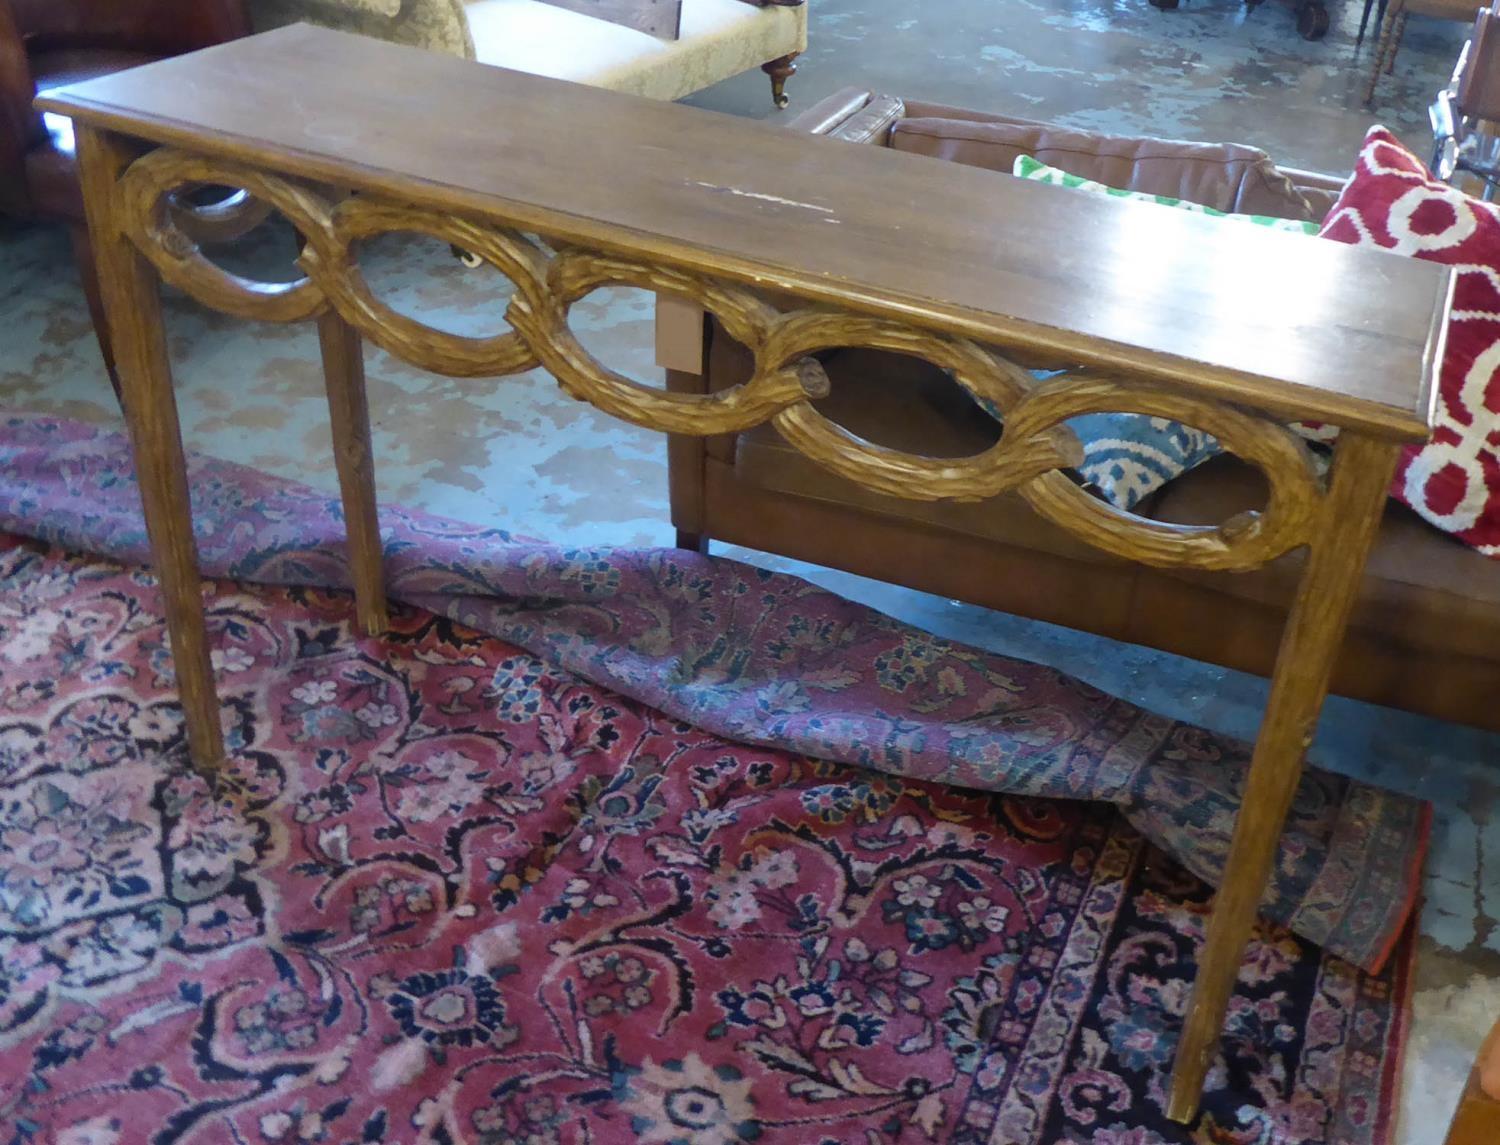 CONSOLE TABLE, of naturalistic design with hoop decoration, 137cm L x 87cm H x 40cm D. (with faults)